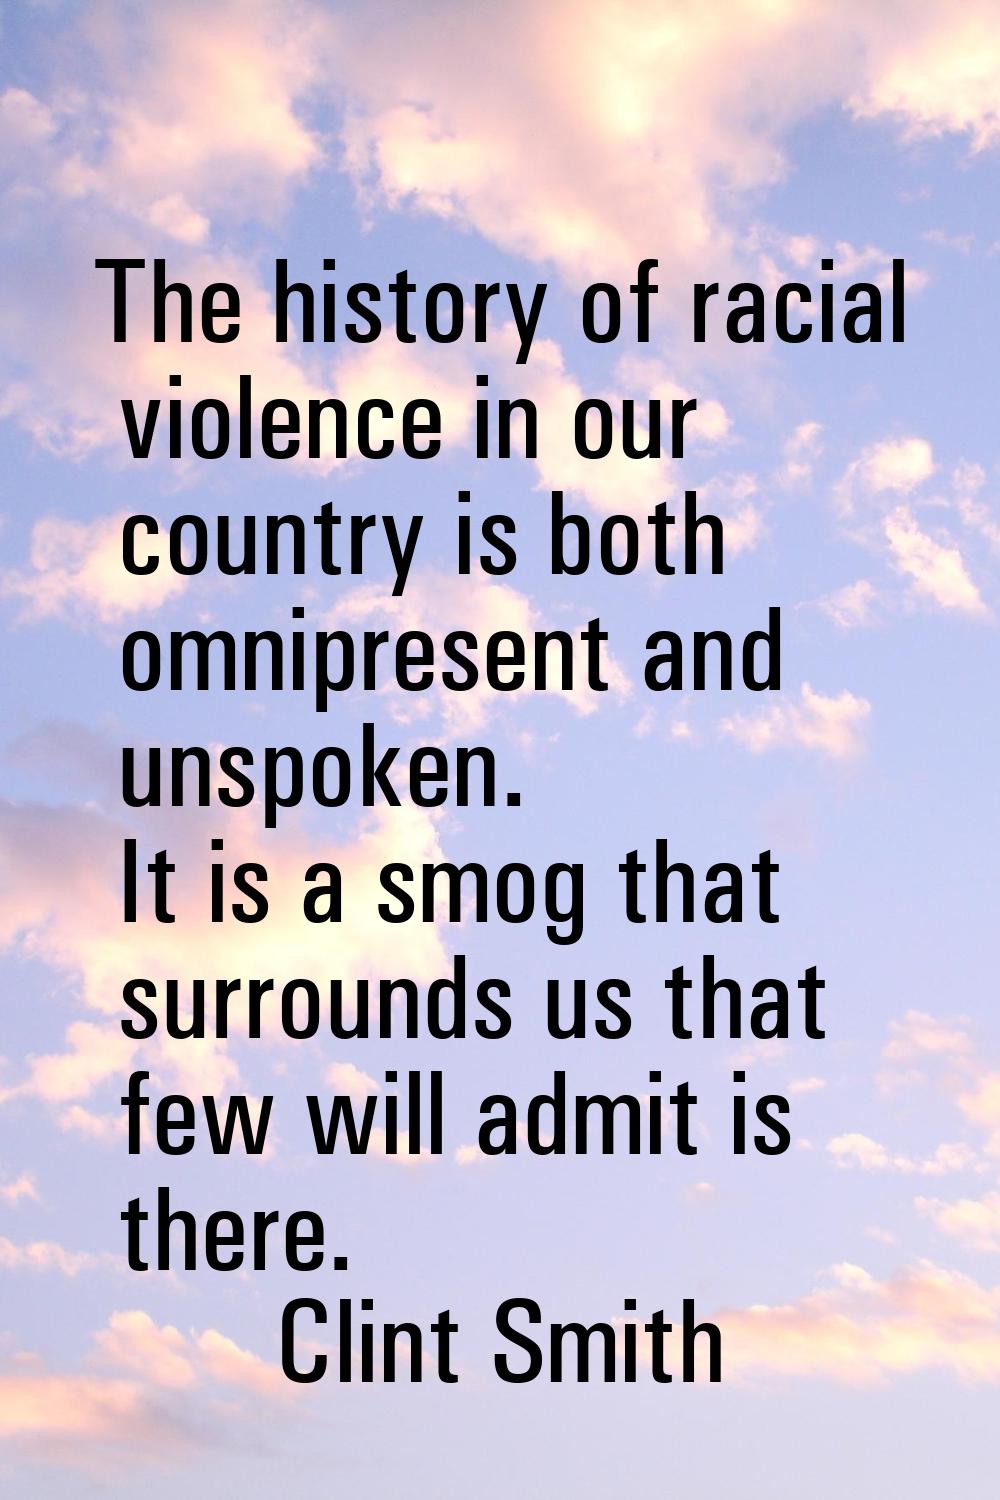 The history of racial violence in our country is both omnipresent and unspoken. It is a smog that s